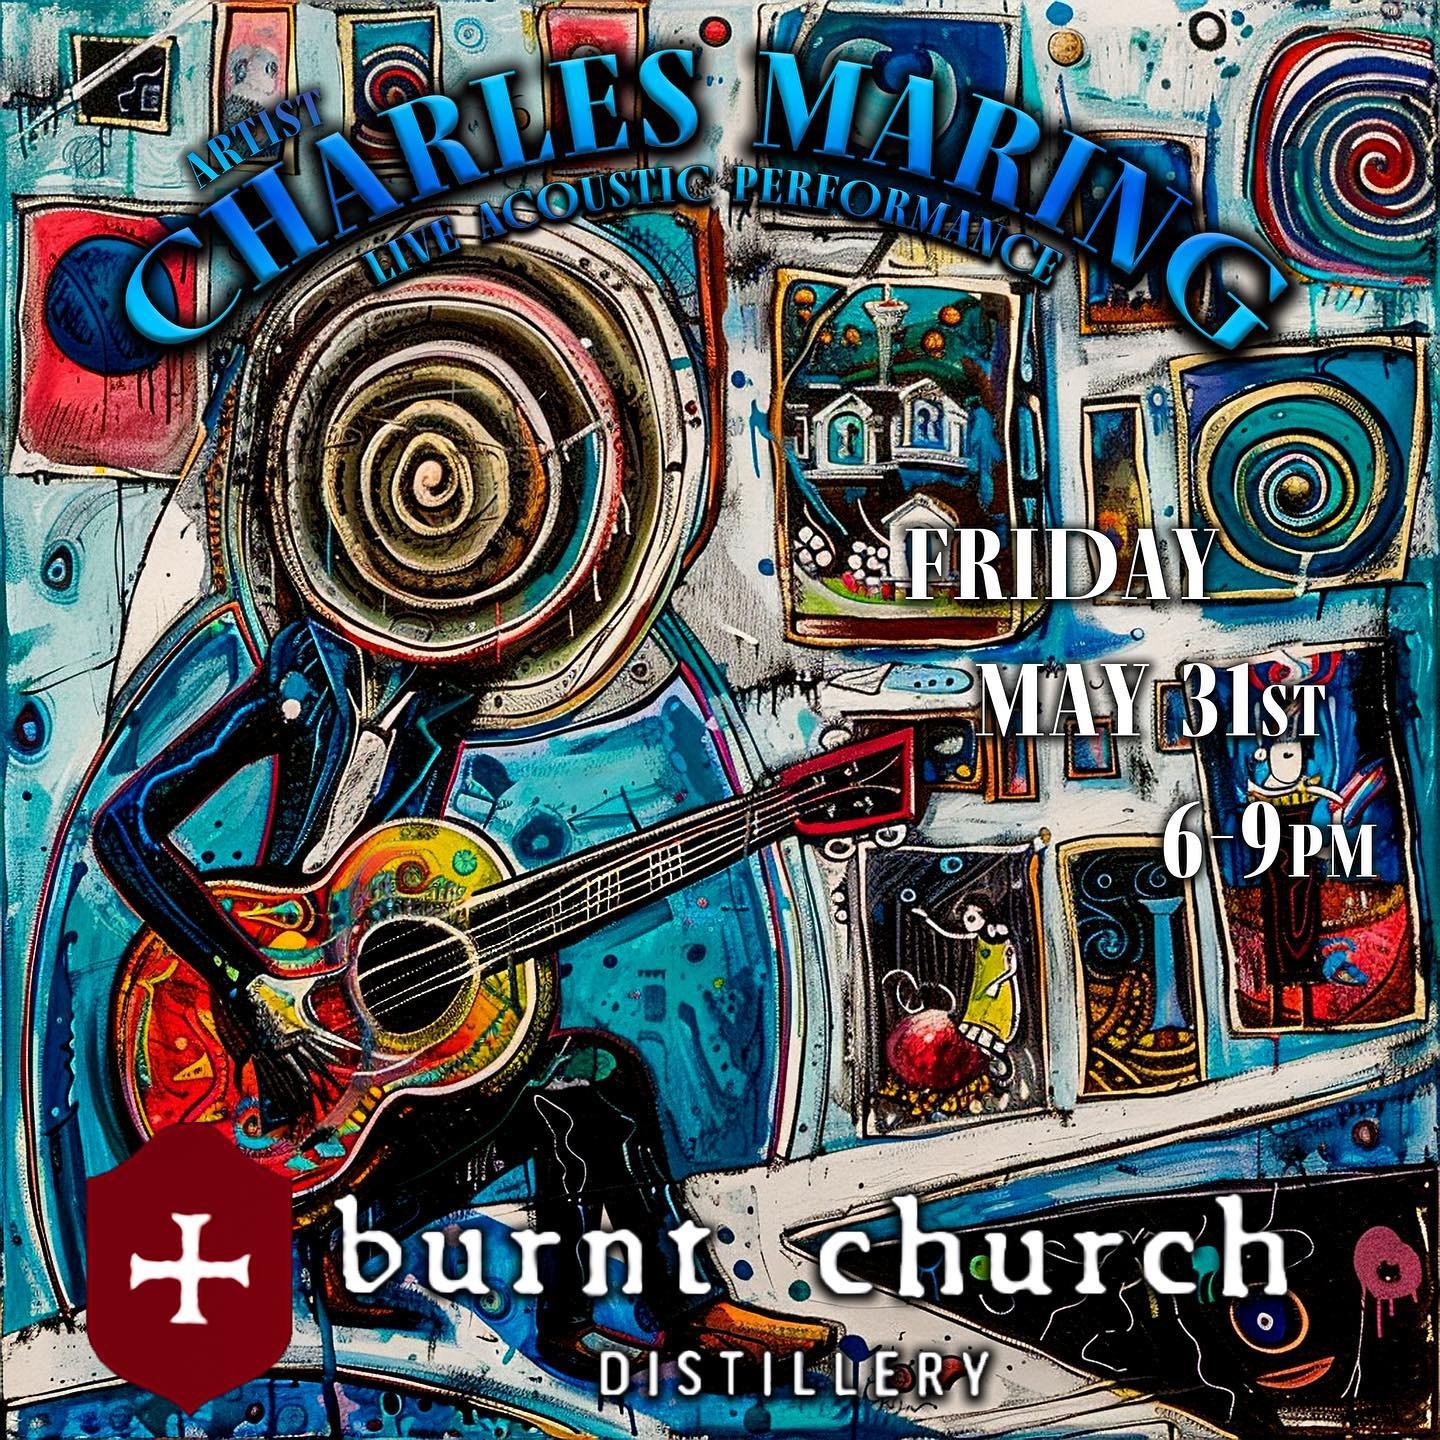 Friday I&rsquo;m bringing the tunes to @burntchurchdistillery from 6-9 Sip down the finest cocktails and chill to some storytelling acoustic music from a local artist. #livemusic #bluffton #visitbluffton #blufftonsc #artist #songwriter